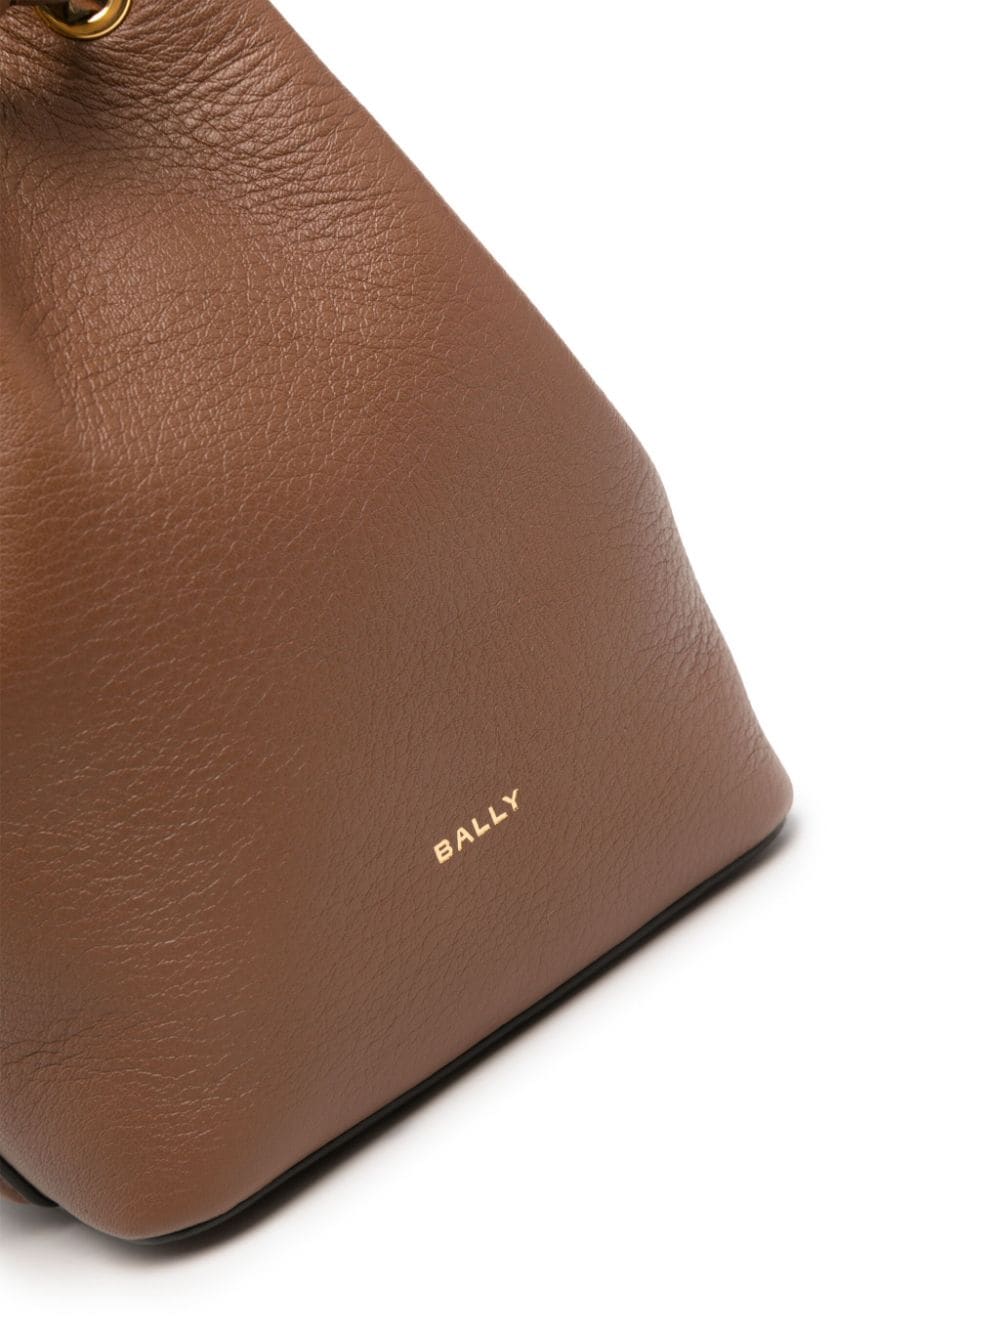 Shop Bally Code Leather Mini Bag In Brown